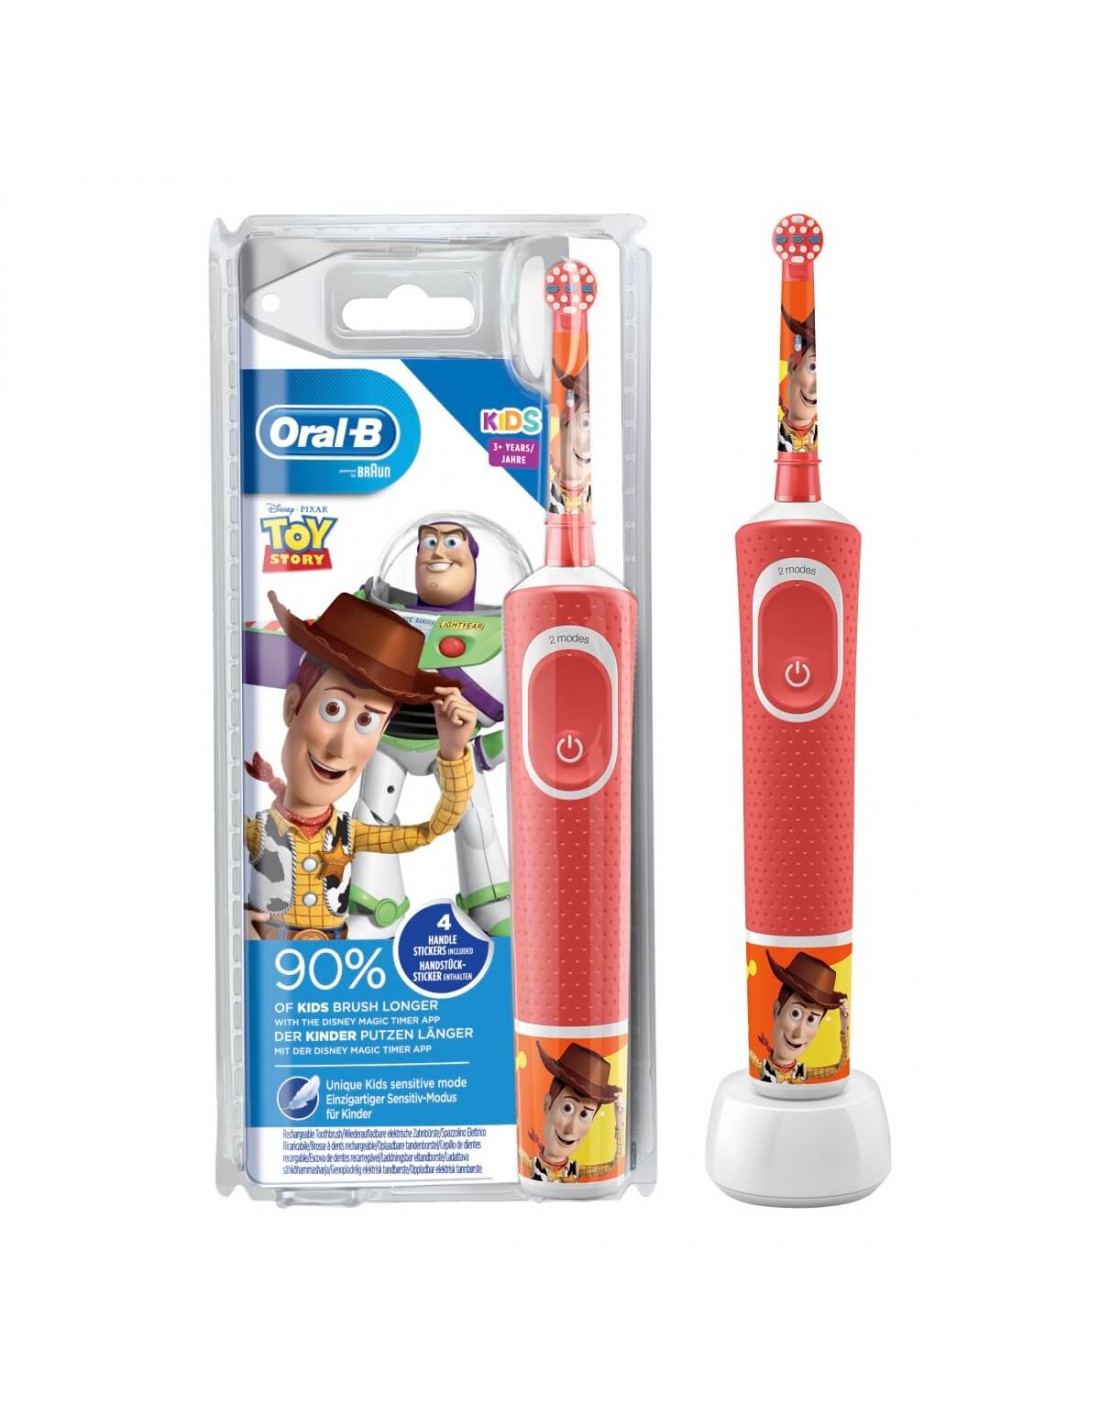 igual Colector Evaluable ORAL B CEPILLO ELECTRICO INFANTIL TOY STORY